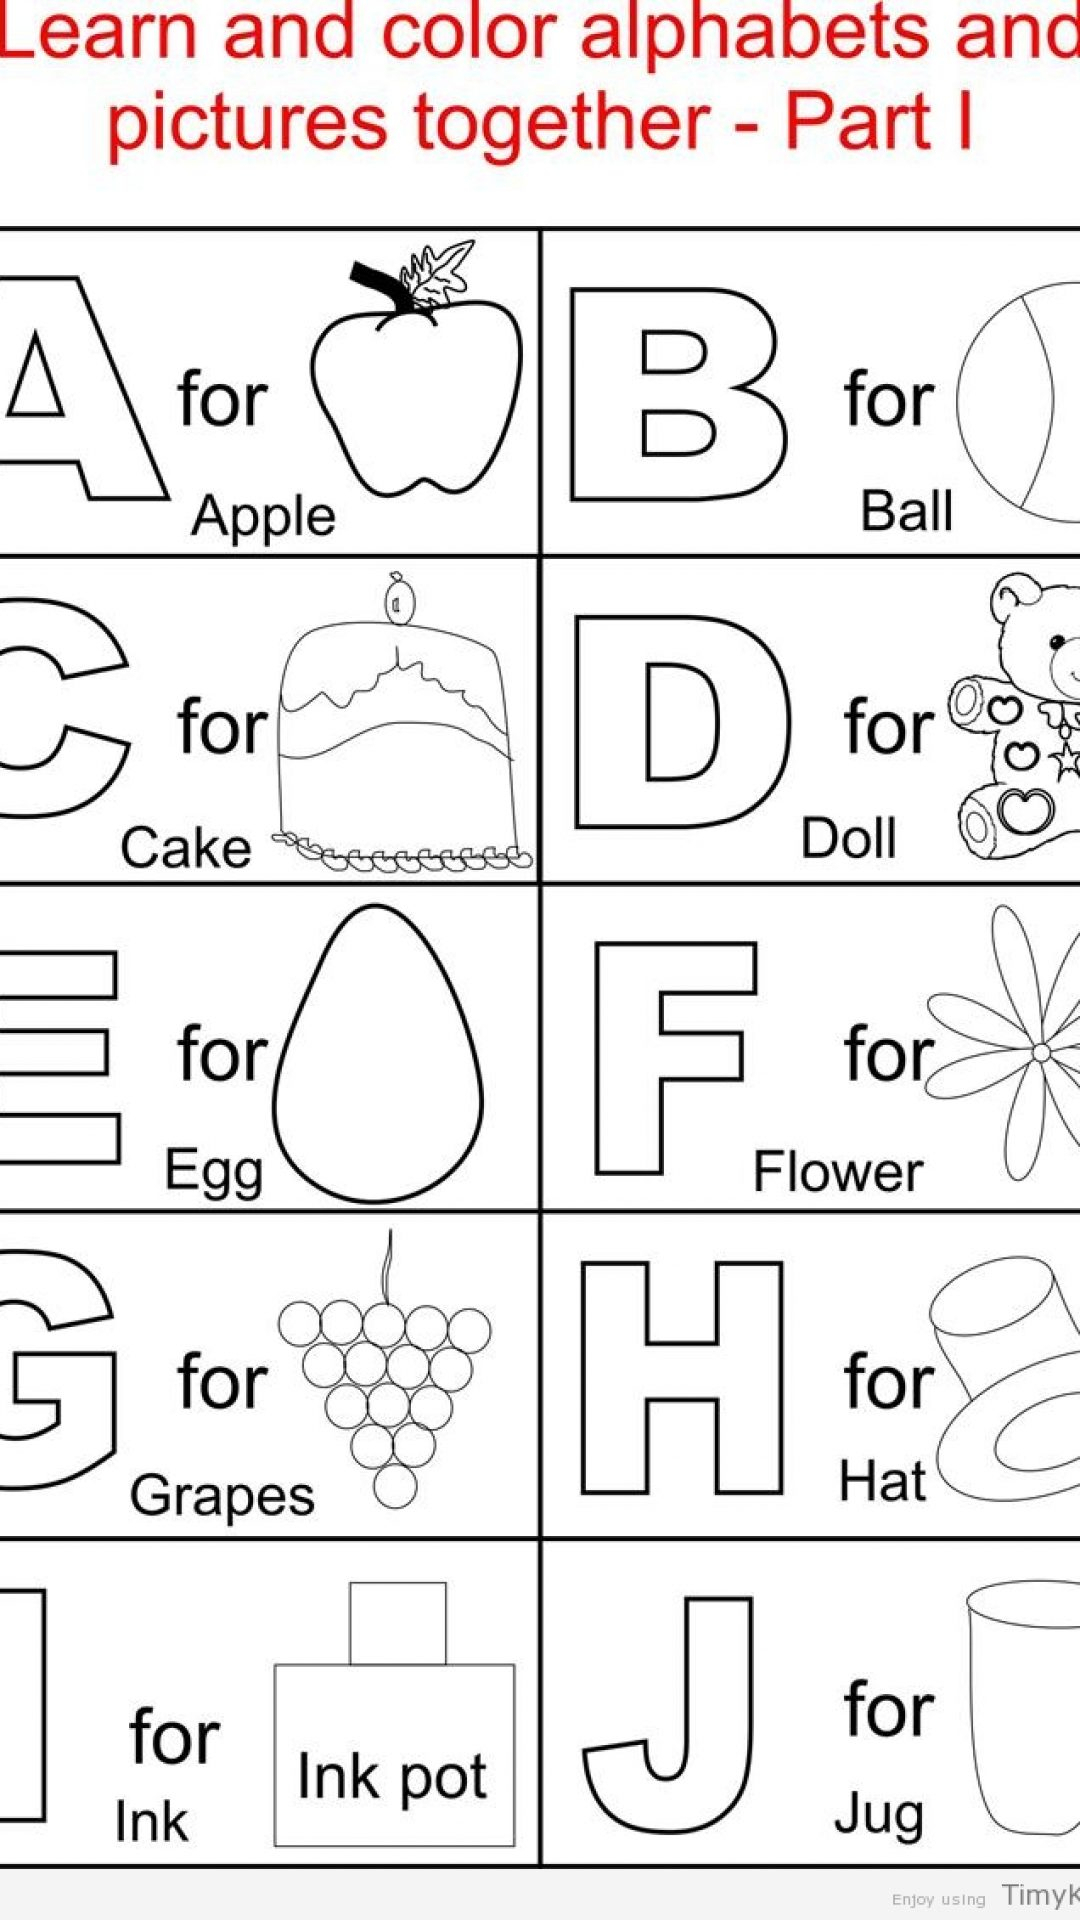 Abc Coloring Pages Pdf intended for Alphabet Coloring Worksheets Pdf